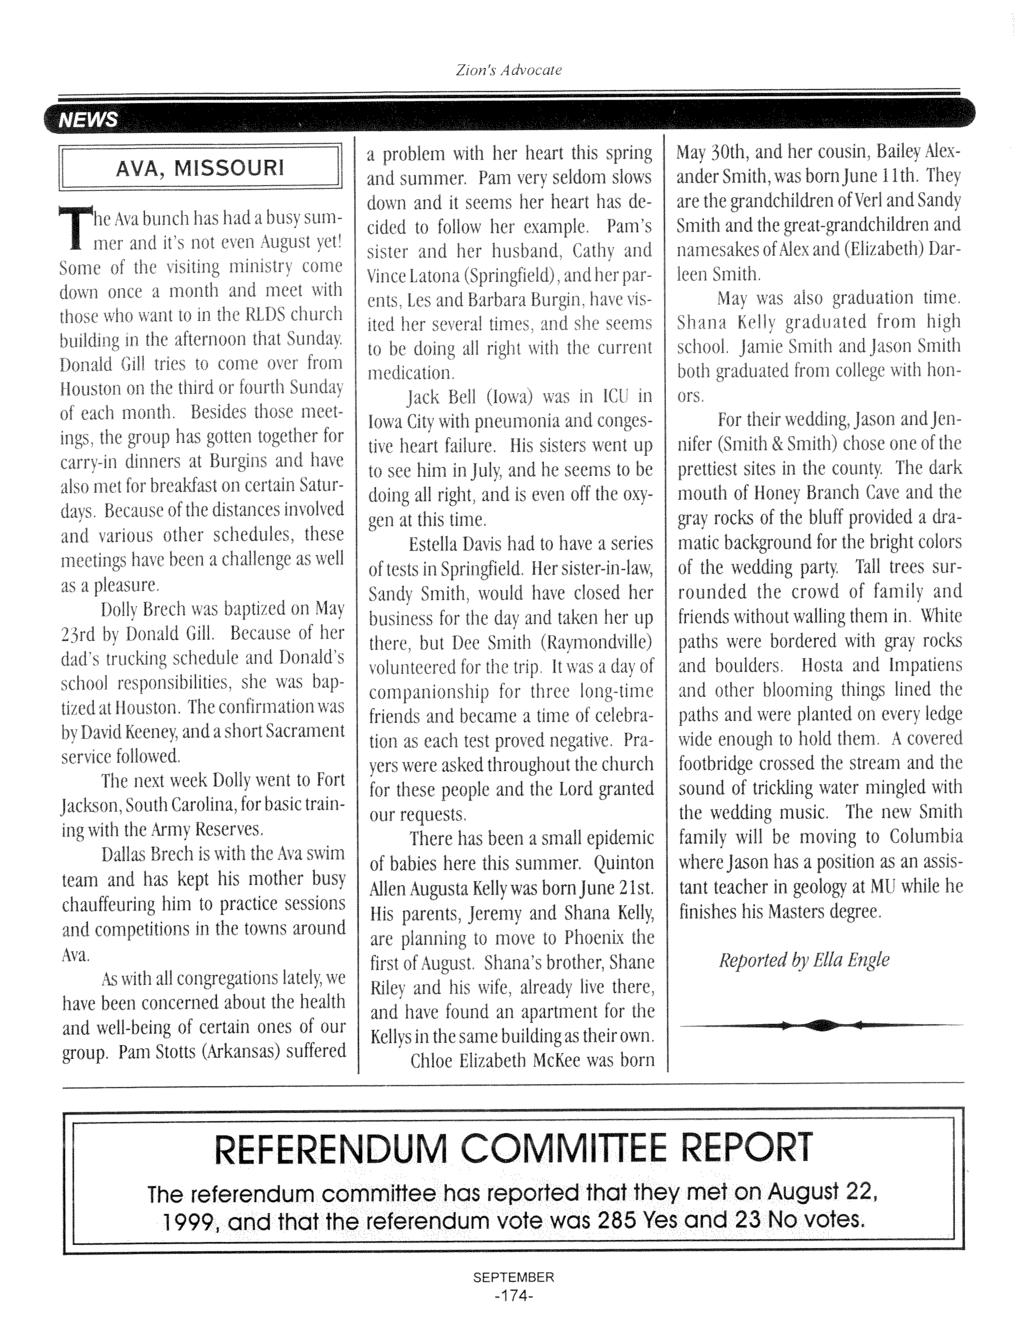 Zion REFERENDUM COMMITIEE REPORT The referendum committee has reported that they